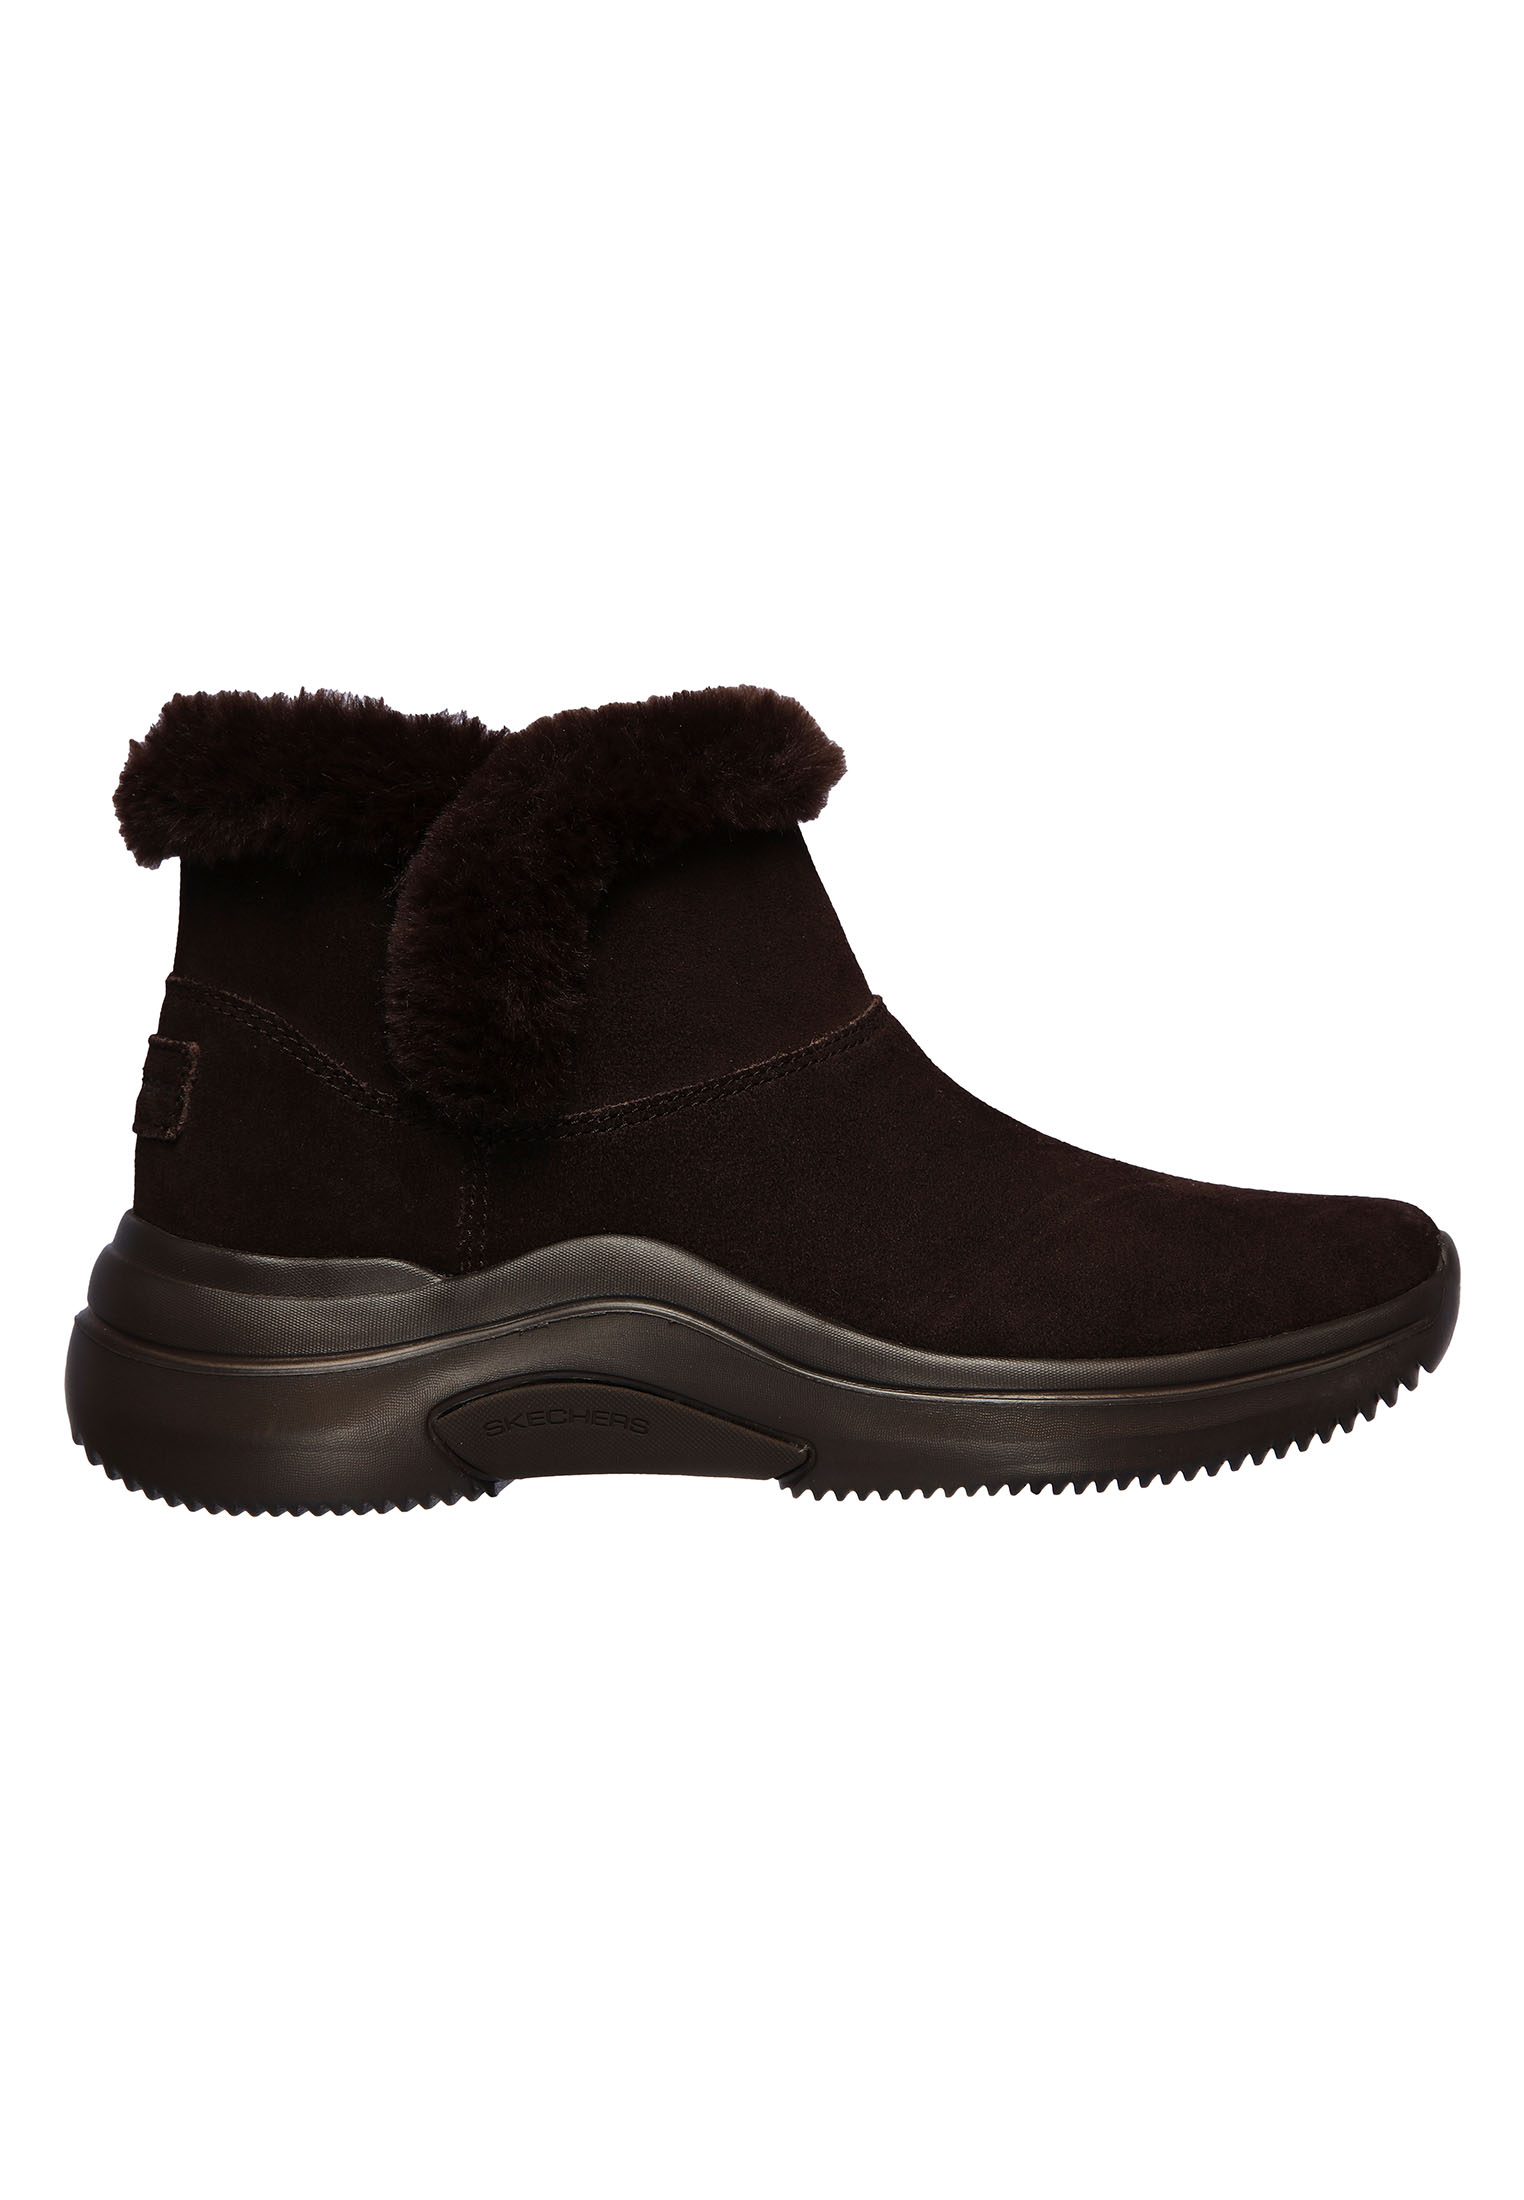 Skechers Boots ON-THE-GO MIDTOWN - SO PLUSH 144250/CHOC Donker Bruin-36 maat 36